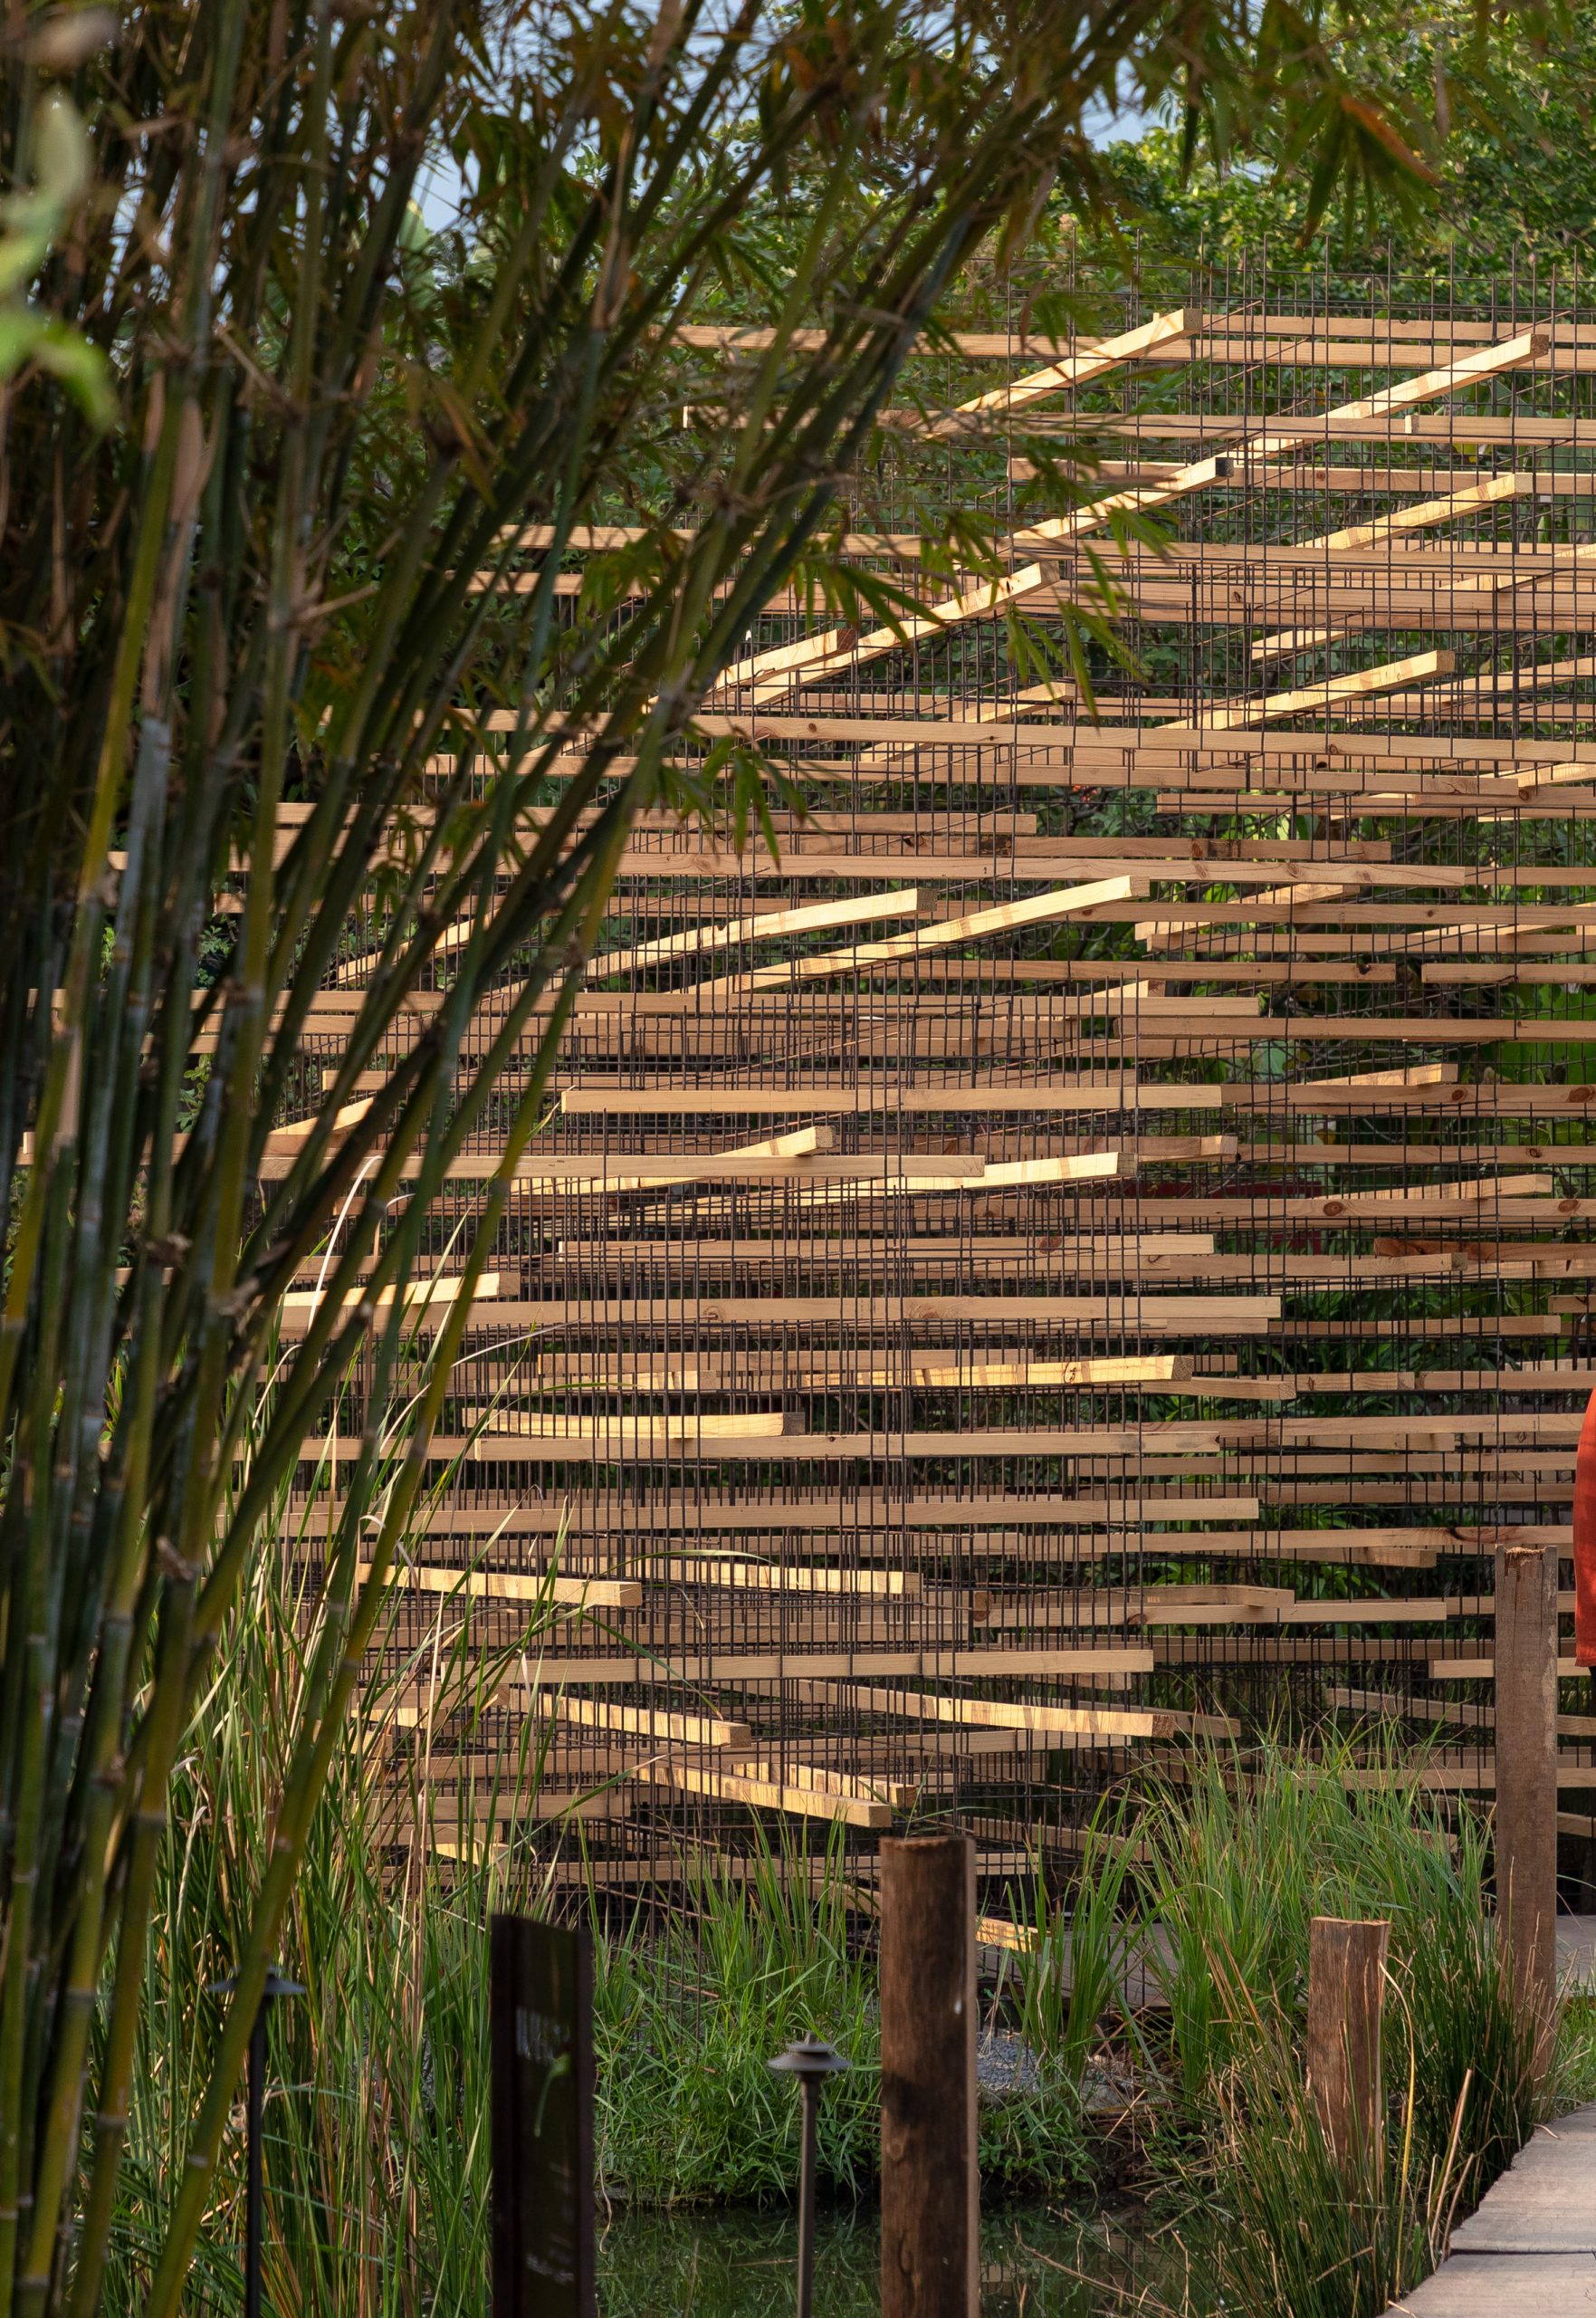 Wood was stacked and arranged in a lattice formation at the Straw Pavilion by MIA Design Studio